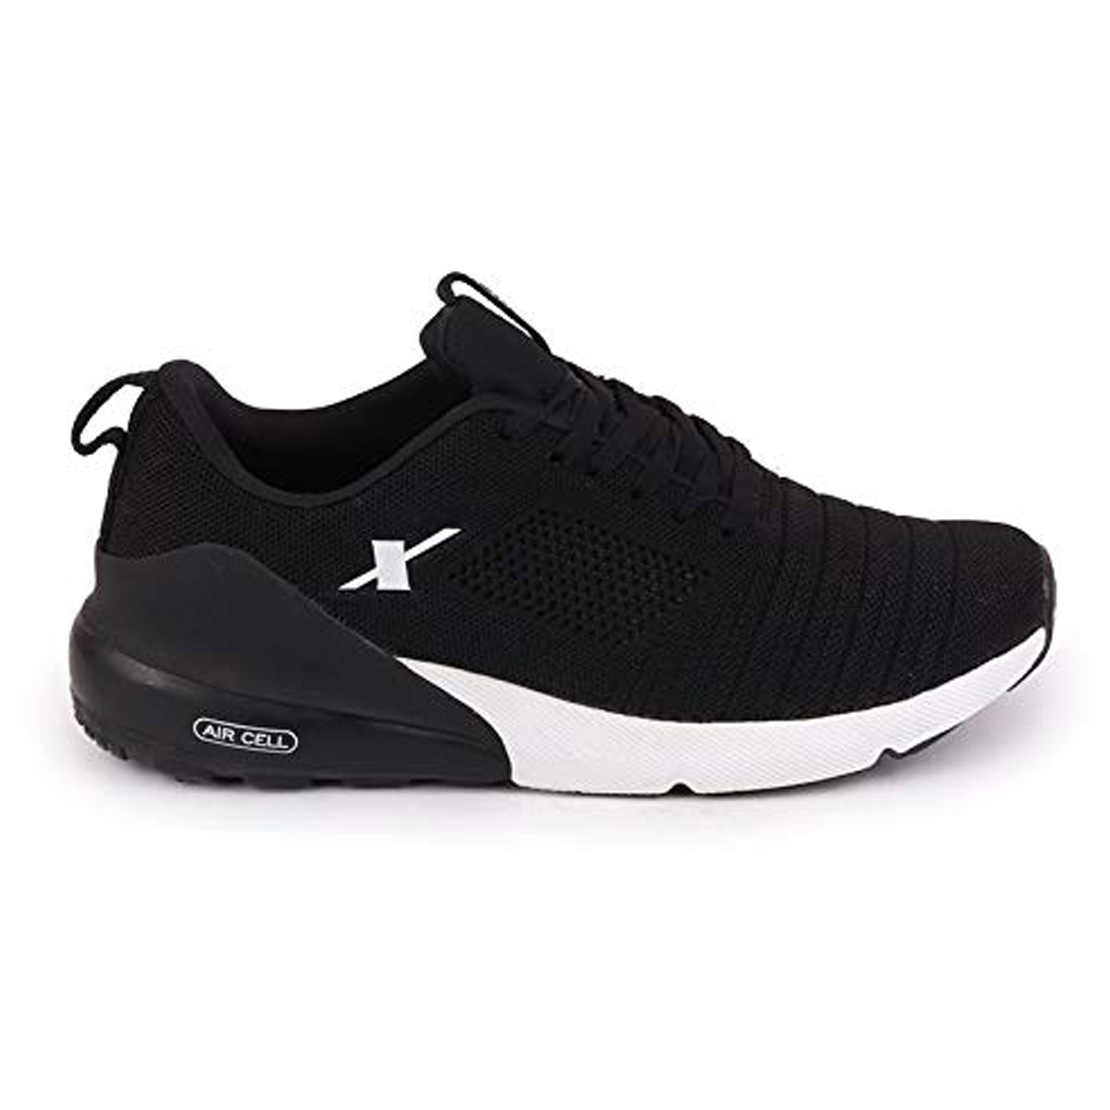 Buy Sparx Men's Black Lace Up Running Shoes Online @ ₹1699 from ShopClues